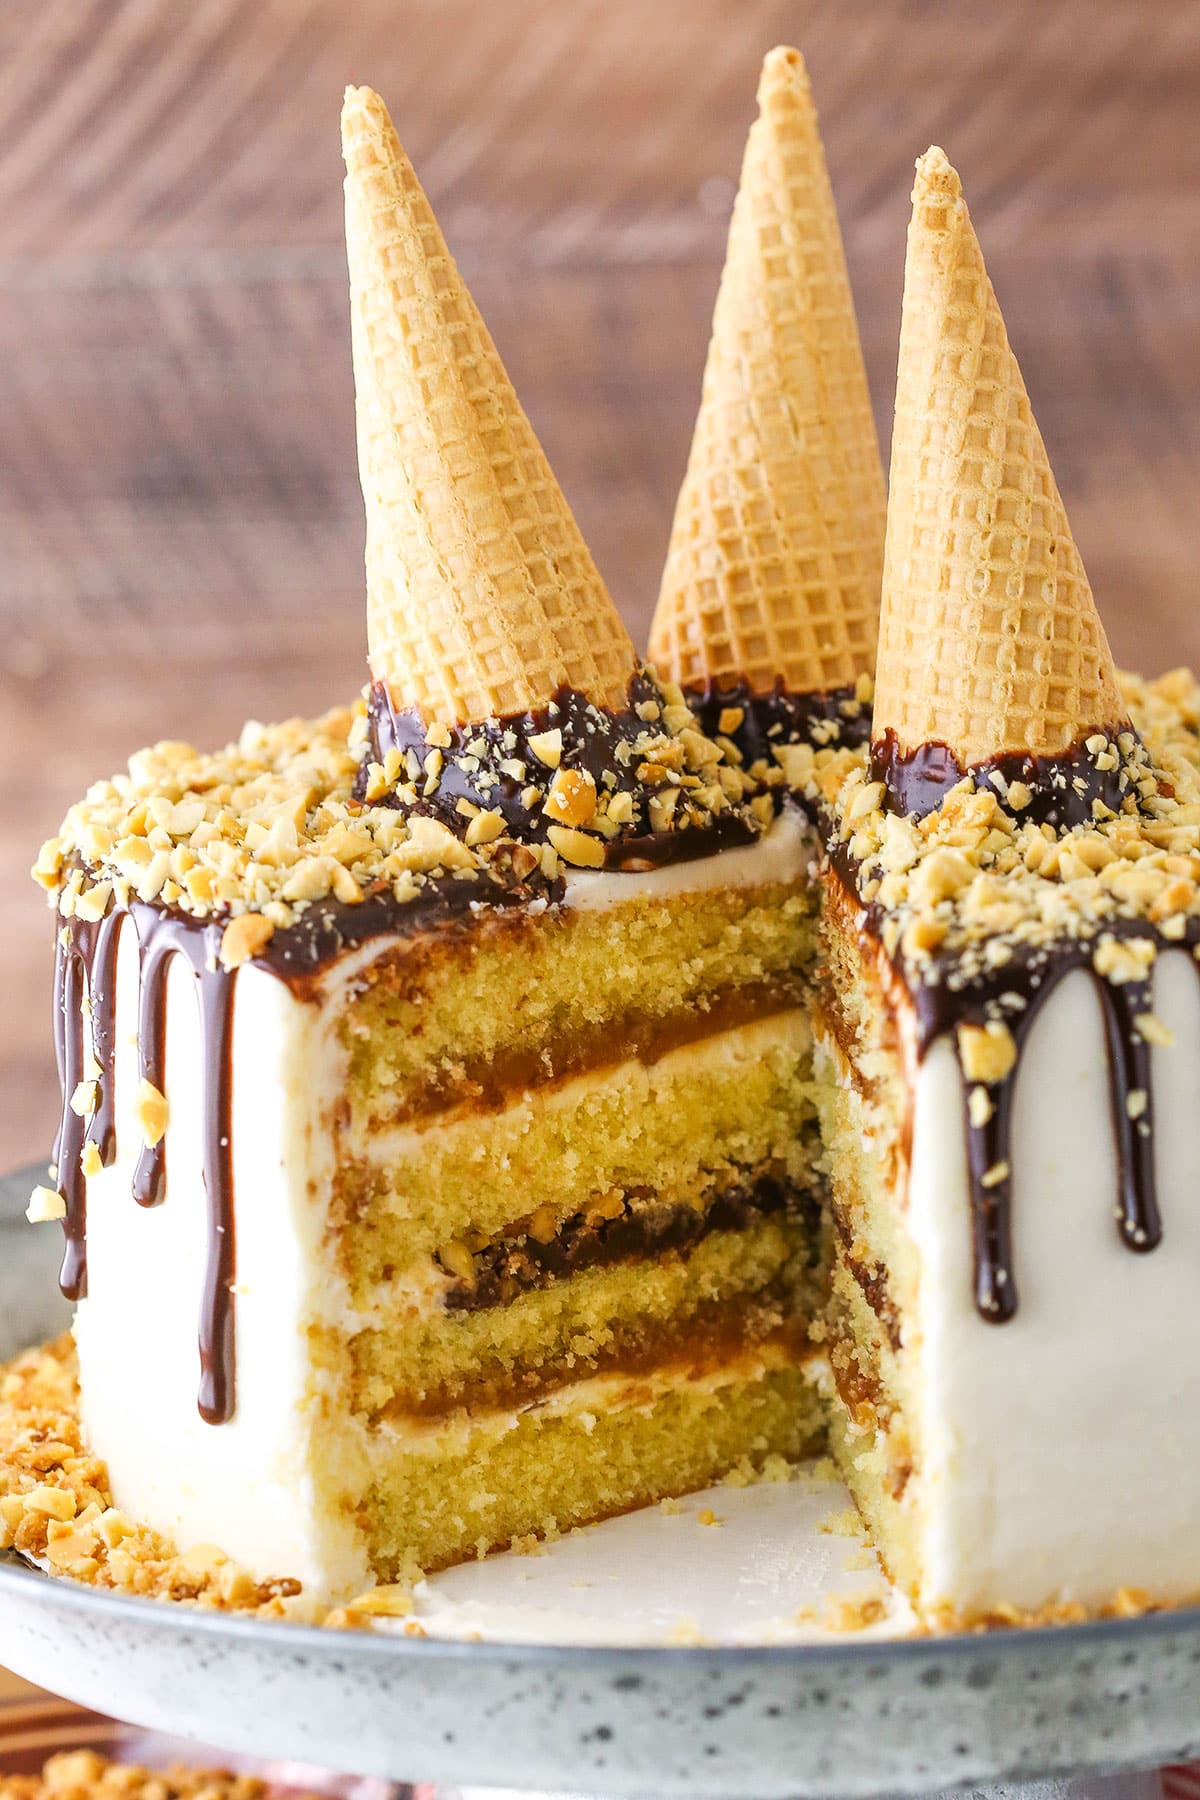 Drumstick Layer Cake with a large serving removed showing the internal layers